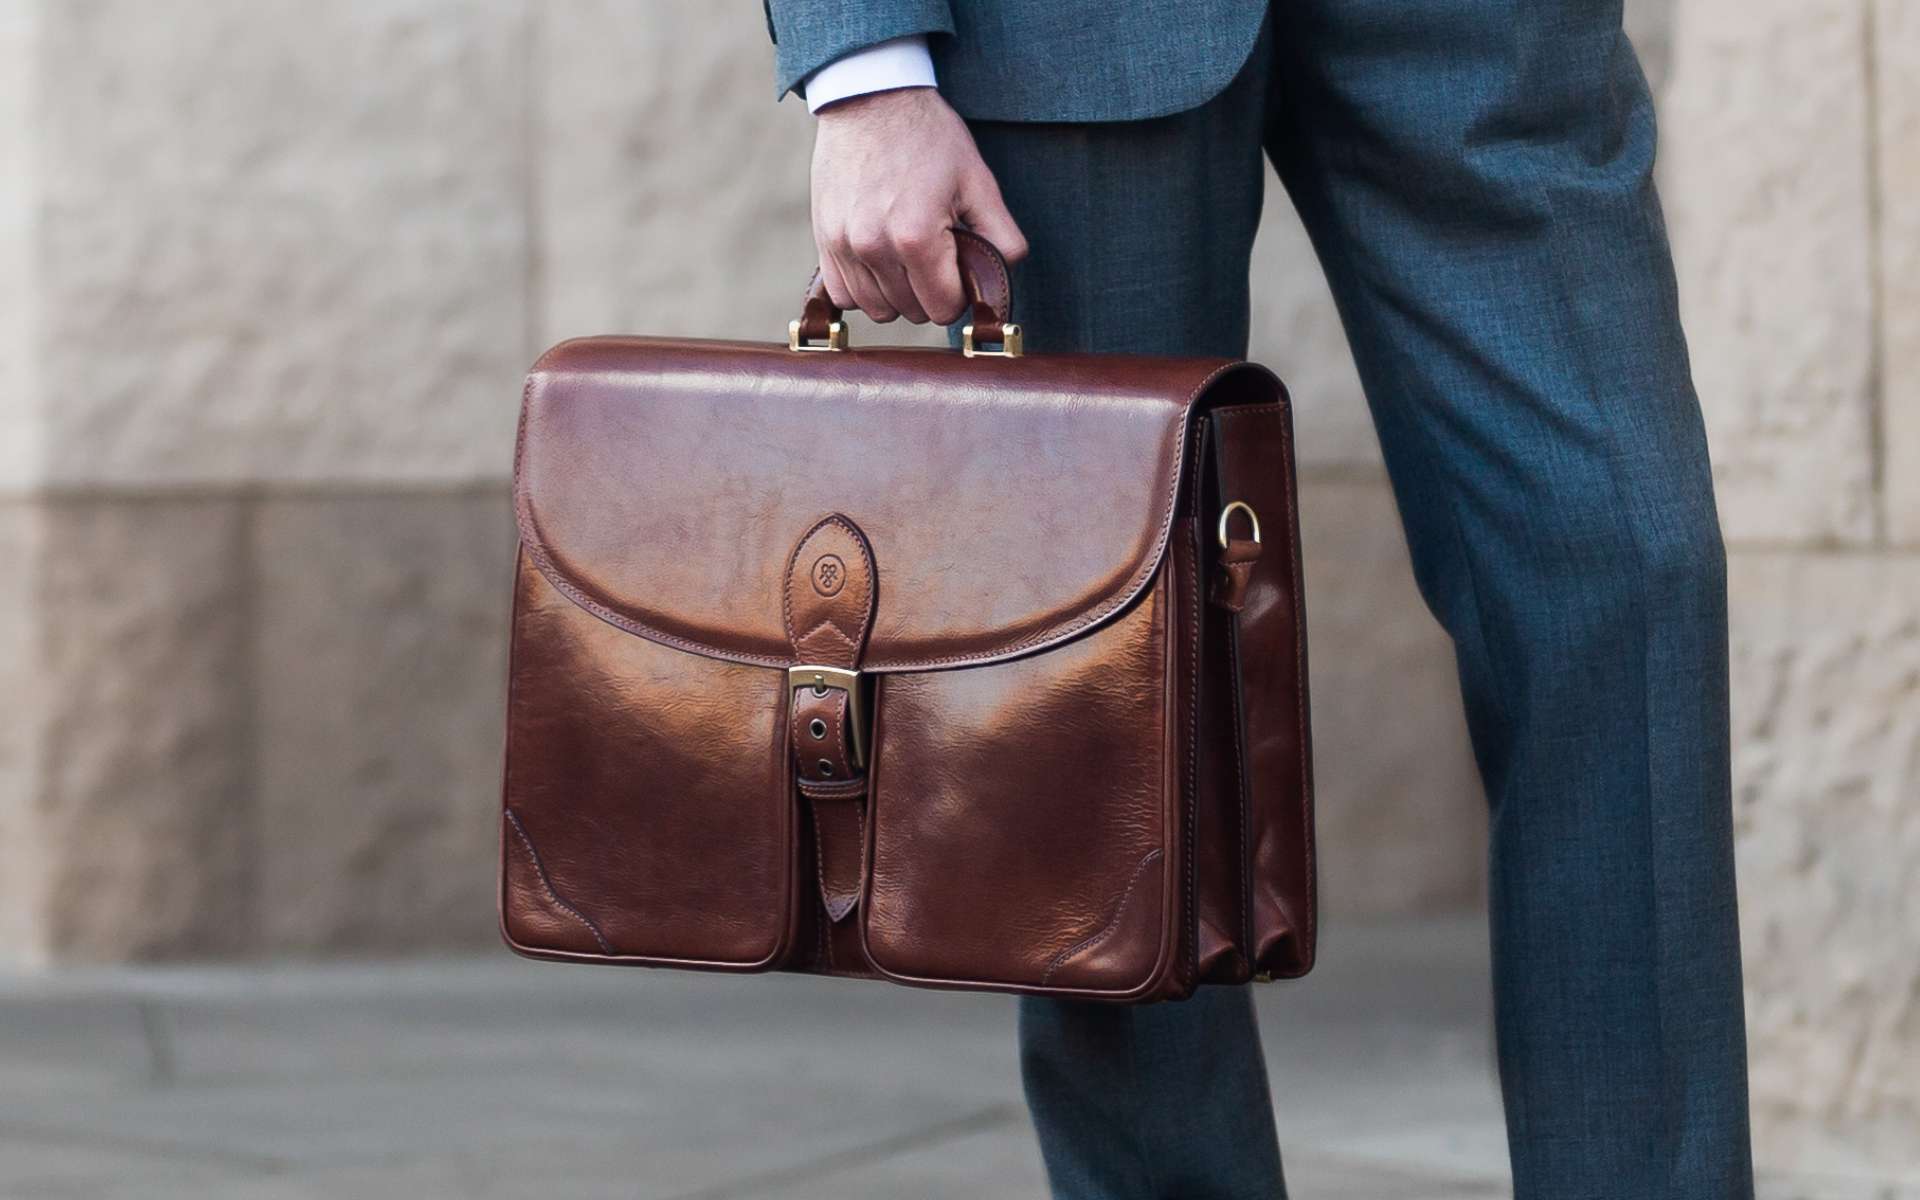 Maxwell Scott | Luxury Briefcases, Quality Mens Wallets, Leather Goods